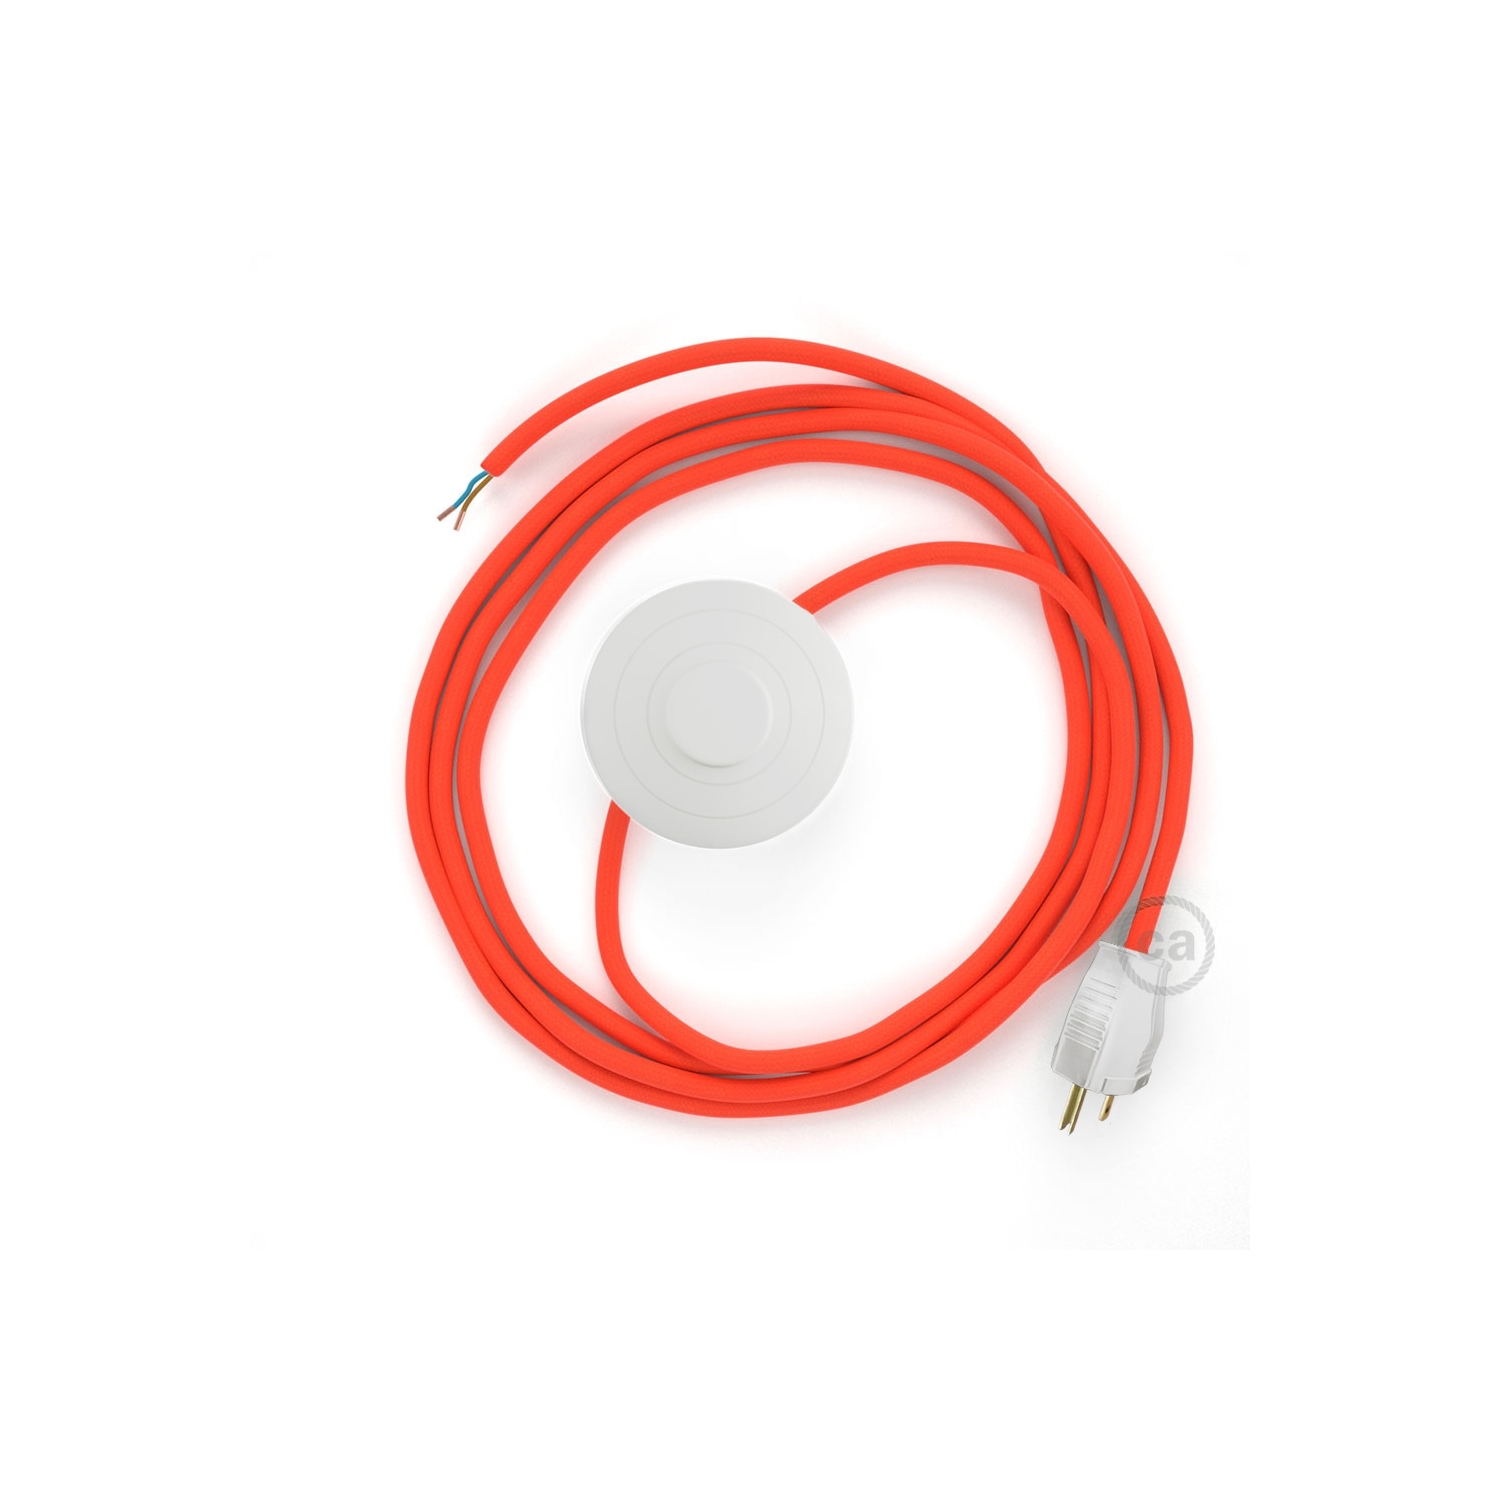 Power Cord with foot switch, RF15 Neon Orange - Choose color of switch/plug